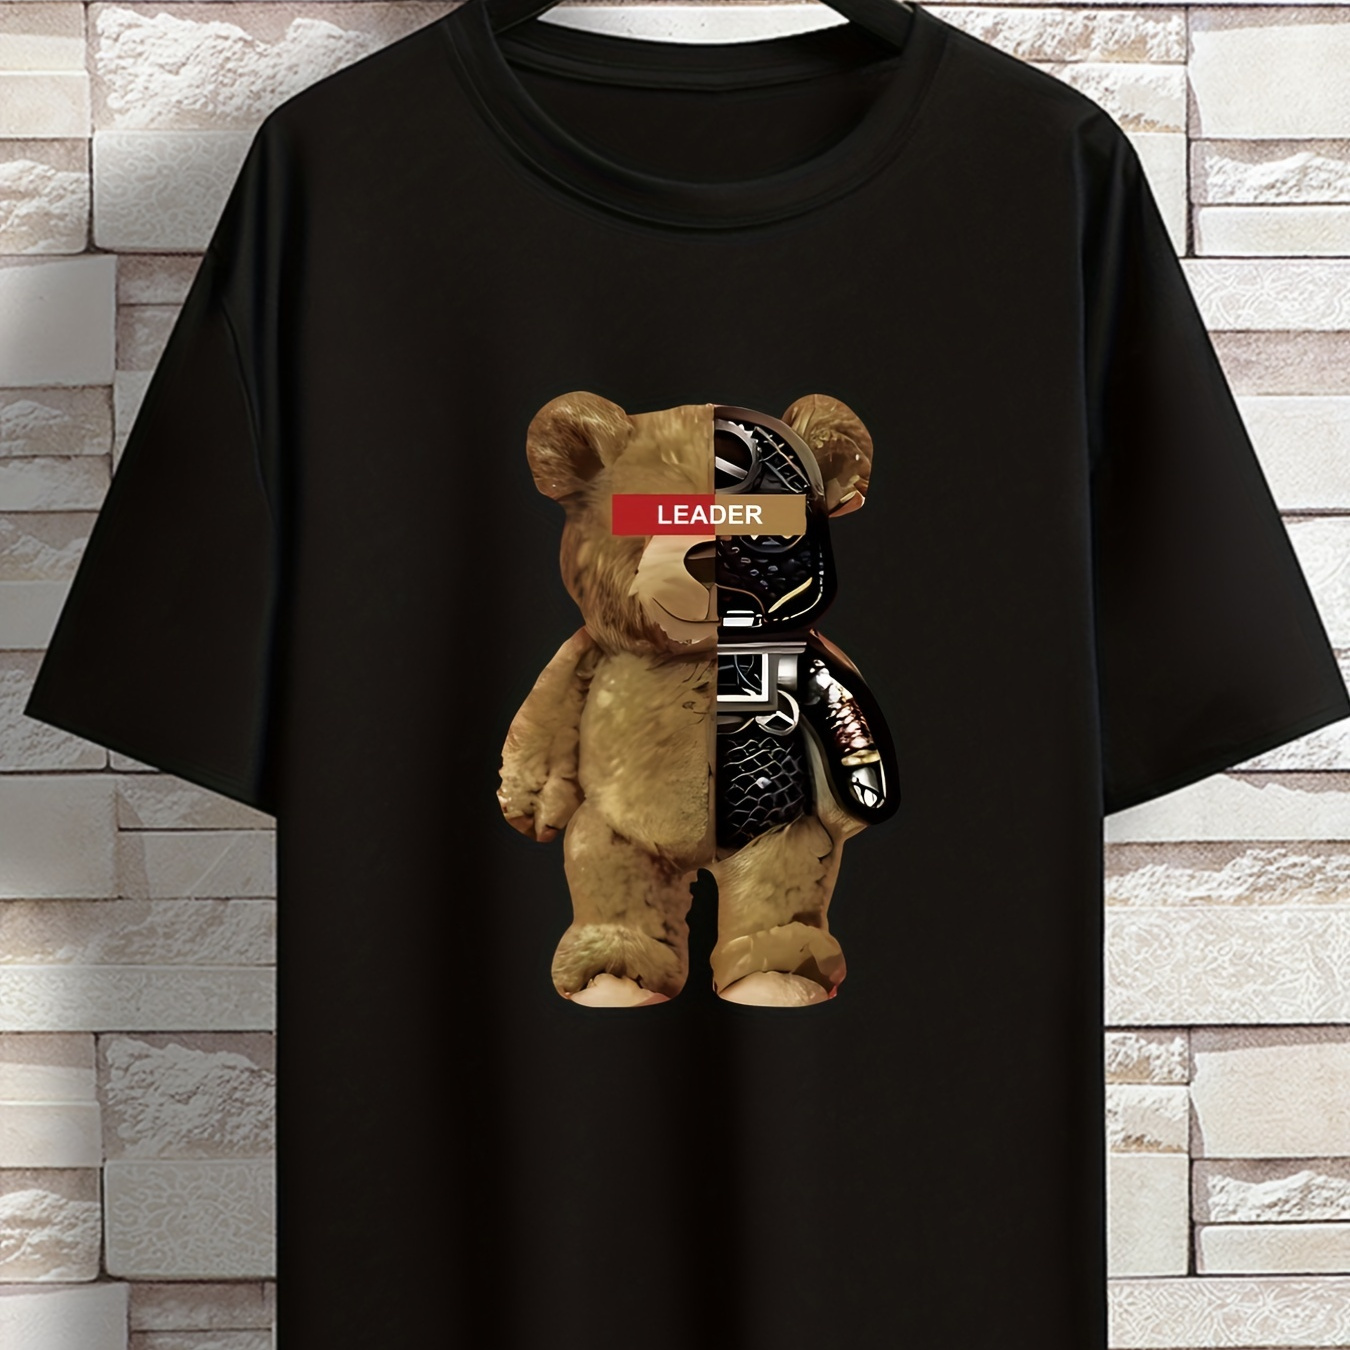 

Plus Size Men's Casual Graphic Tees For Summer, "leader Bear" Print Crew Neck Oversized T-shirts, Trendy Chic Outfit Men's Clothings